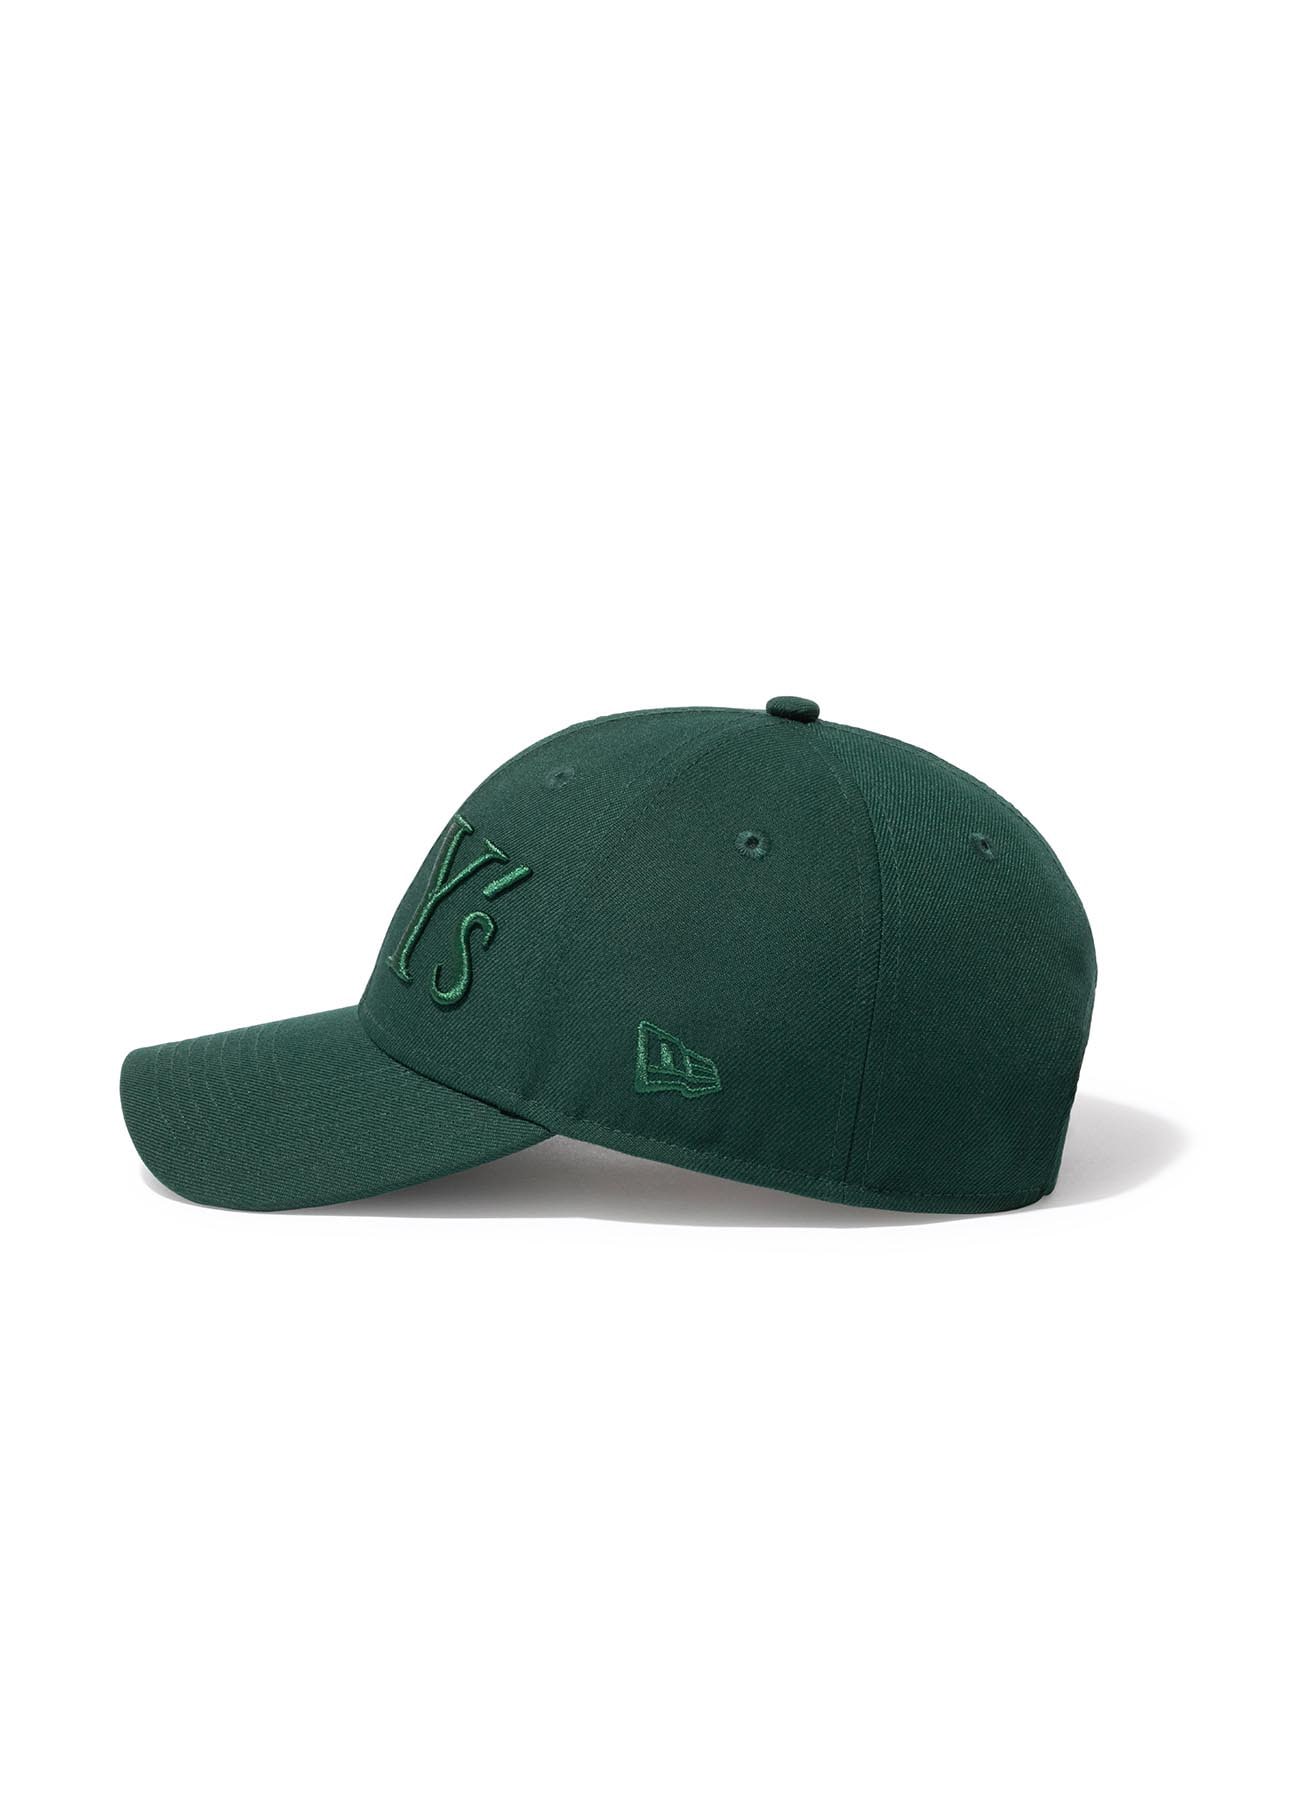 Y's × New Era] 9FORTY Y's LOGO CAP(FREE SIZE Green): Y's｜THE SHOP 